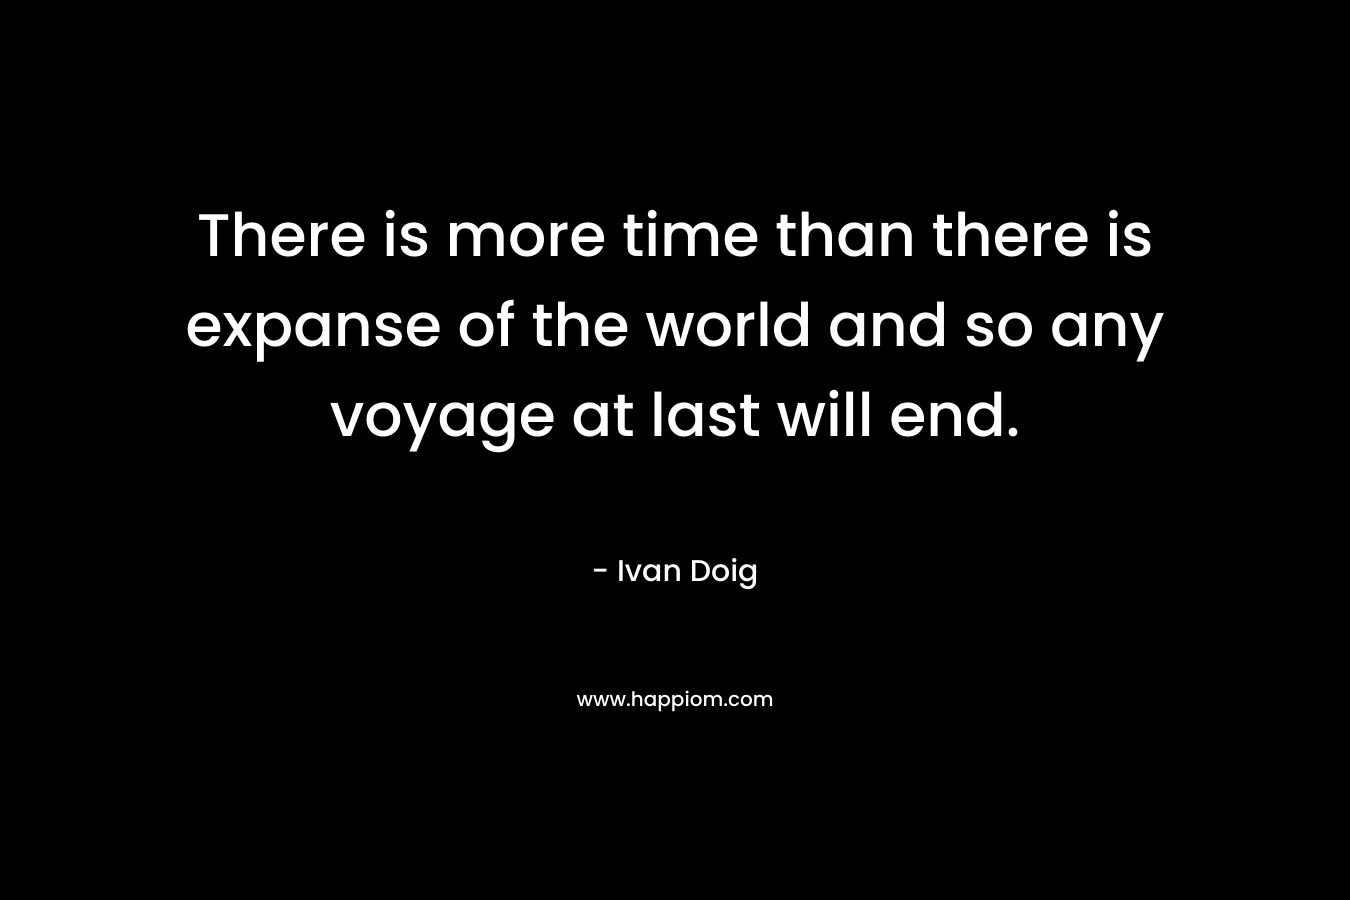 There is more time than there is expanse of the world and so any voyage at last will end. – Ivan Doig